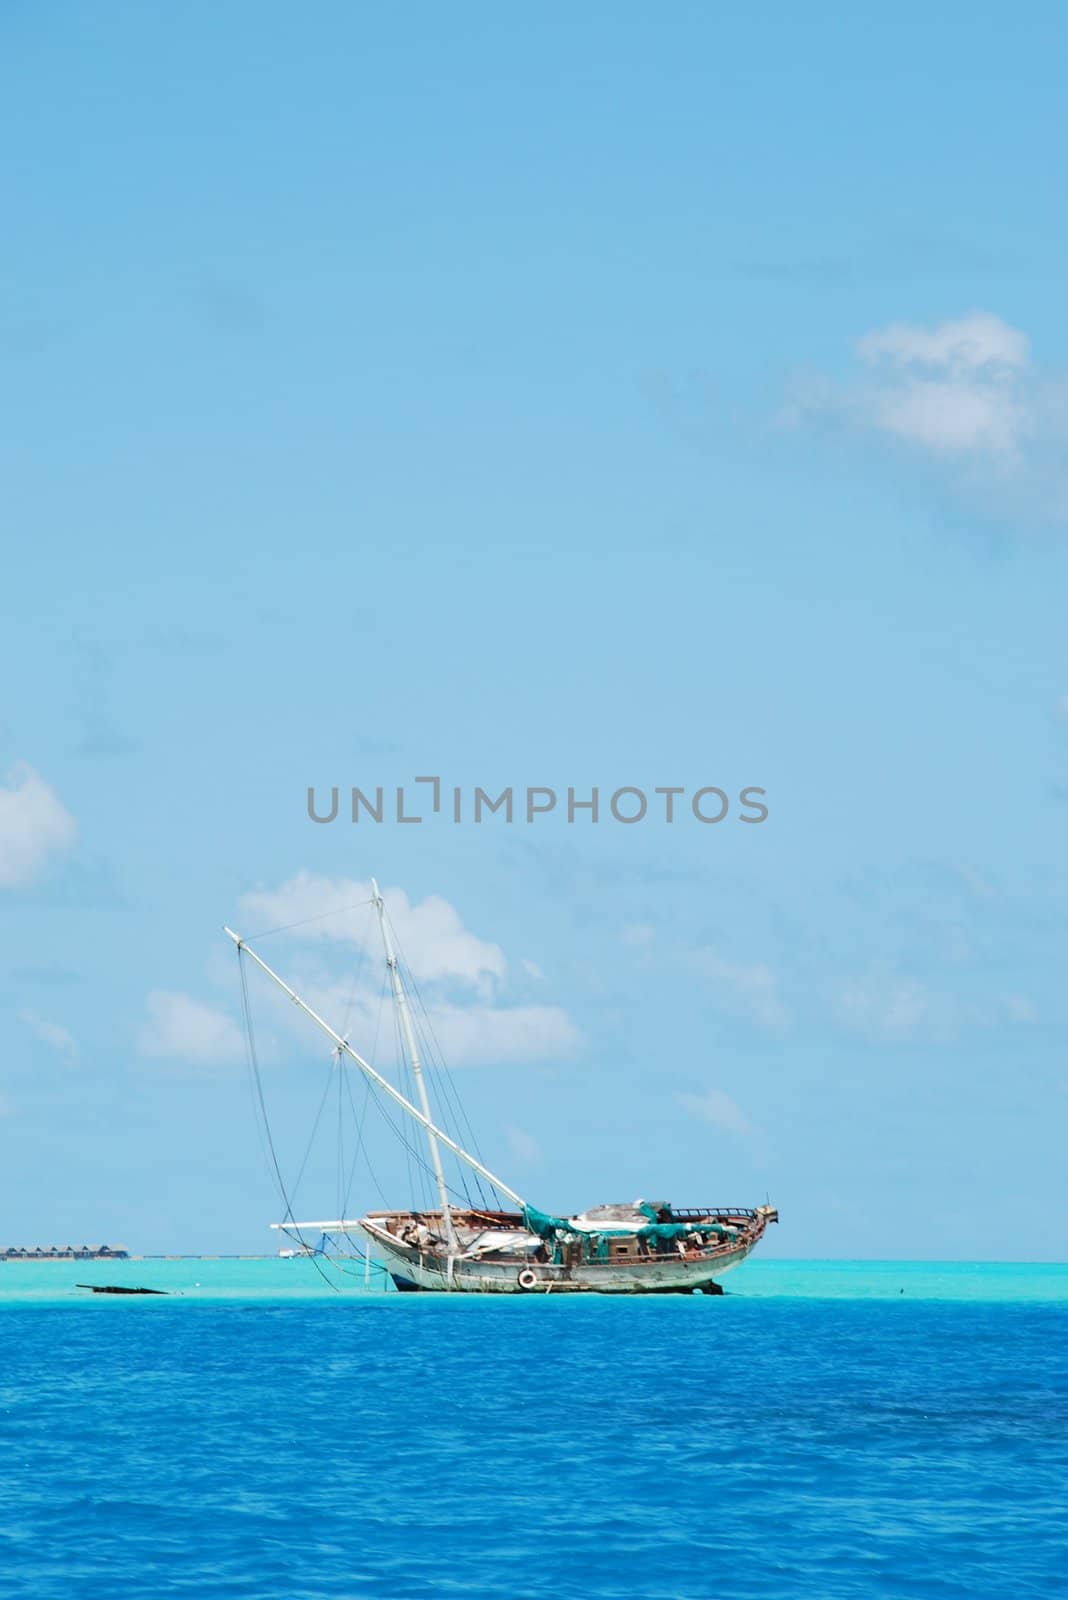 Semi-submerged typical ship on Maldives by luissantos84